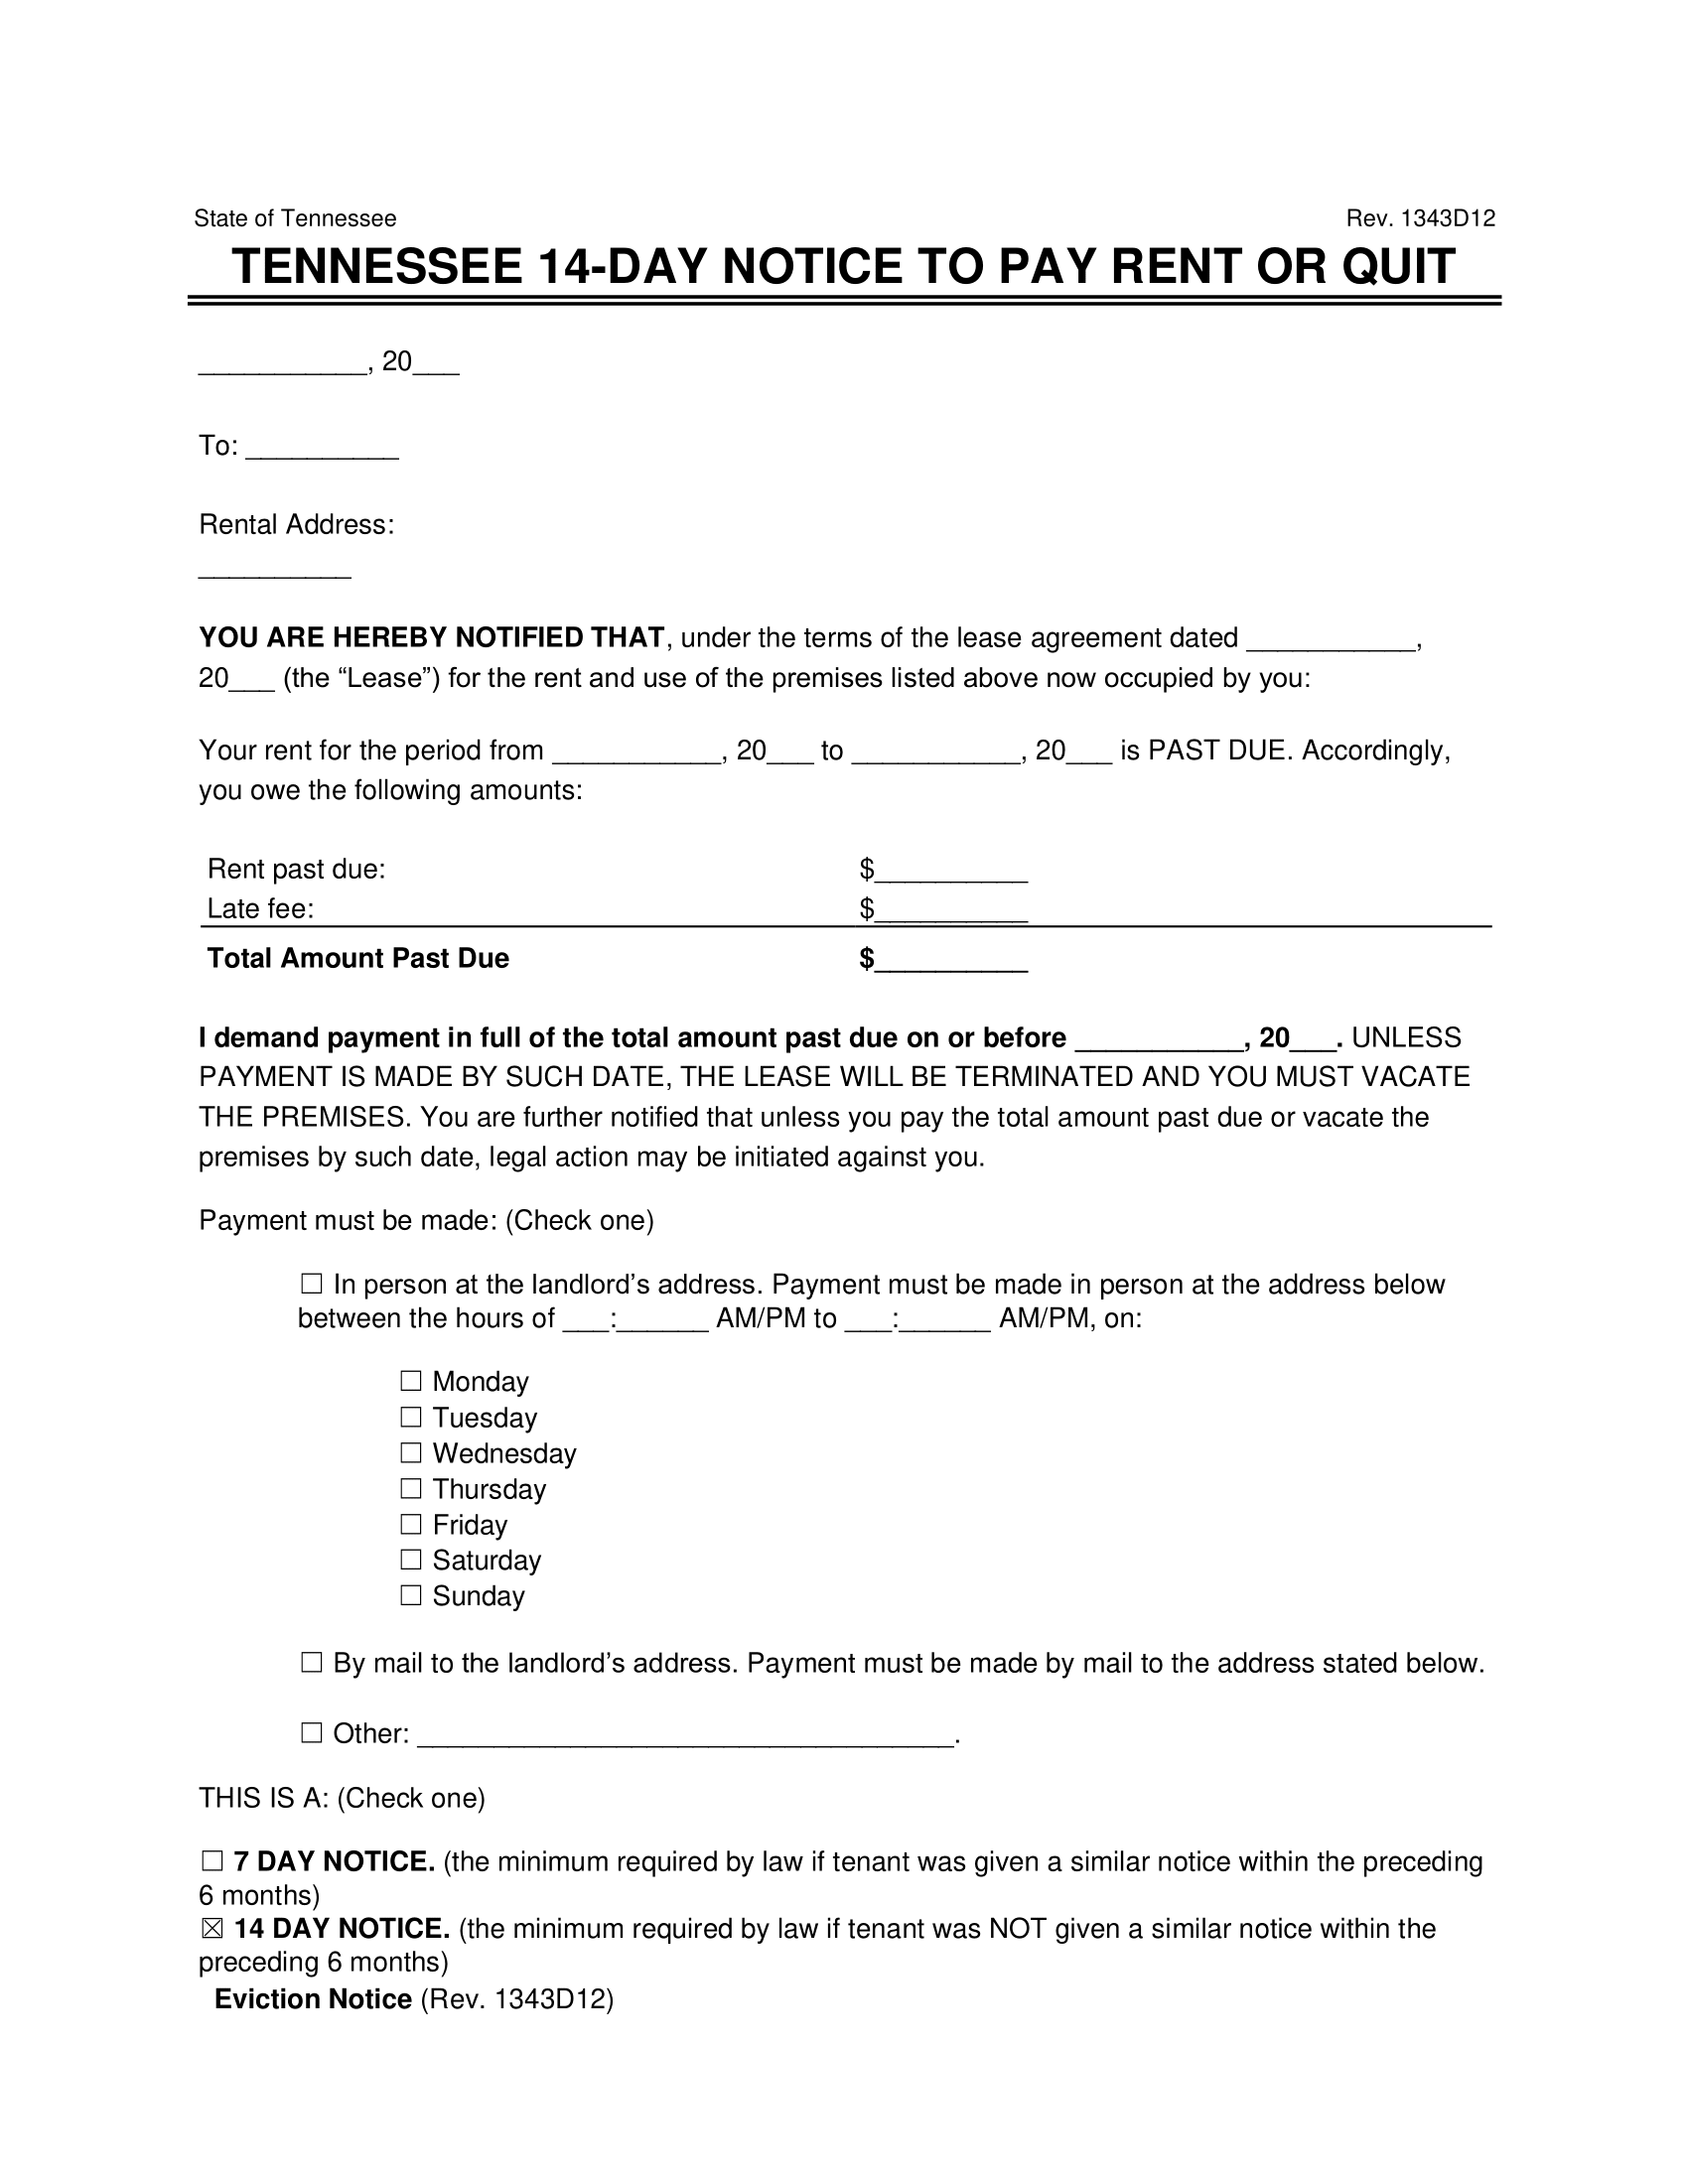 Tennessee 14 Day Eviction Notice to Quit Non Payment of Rent